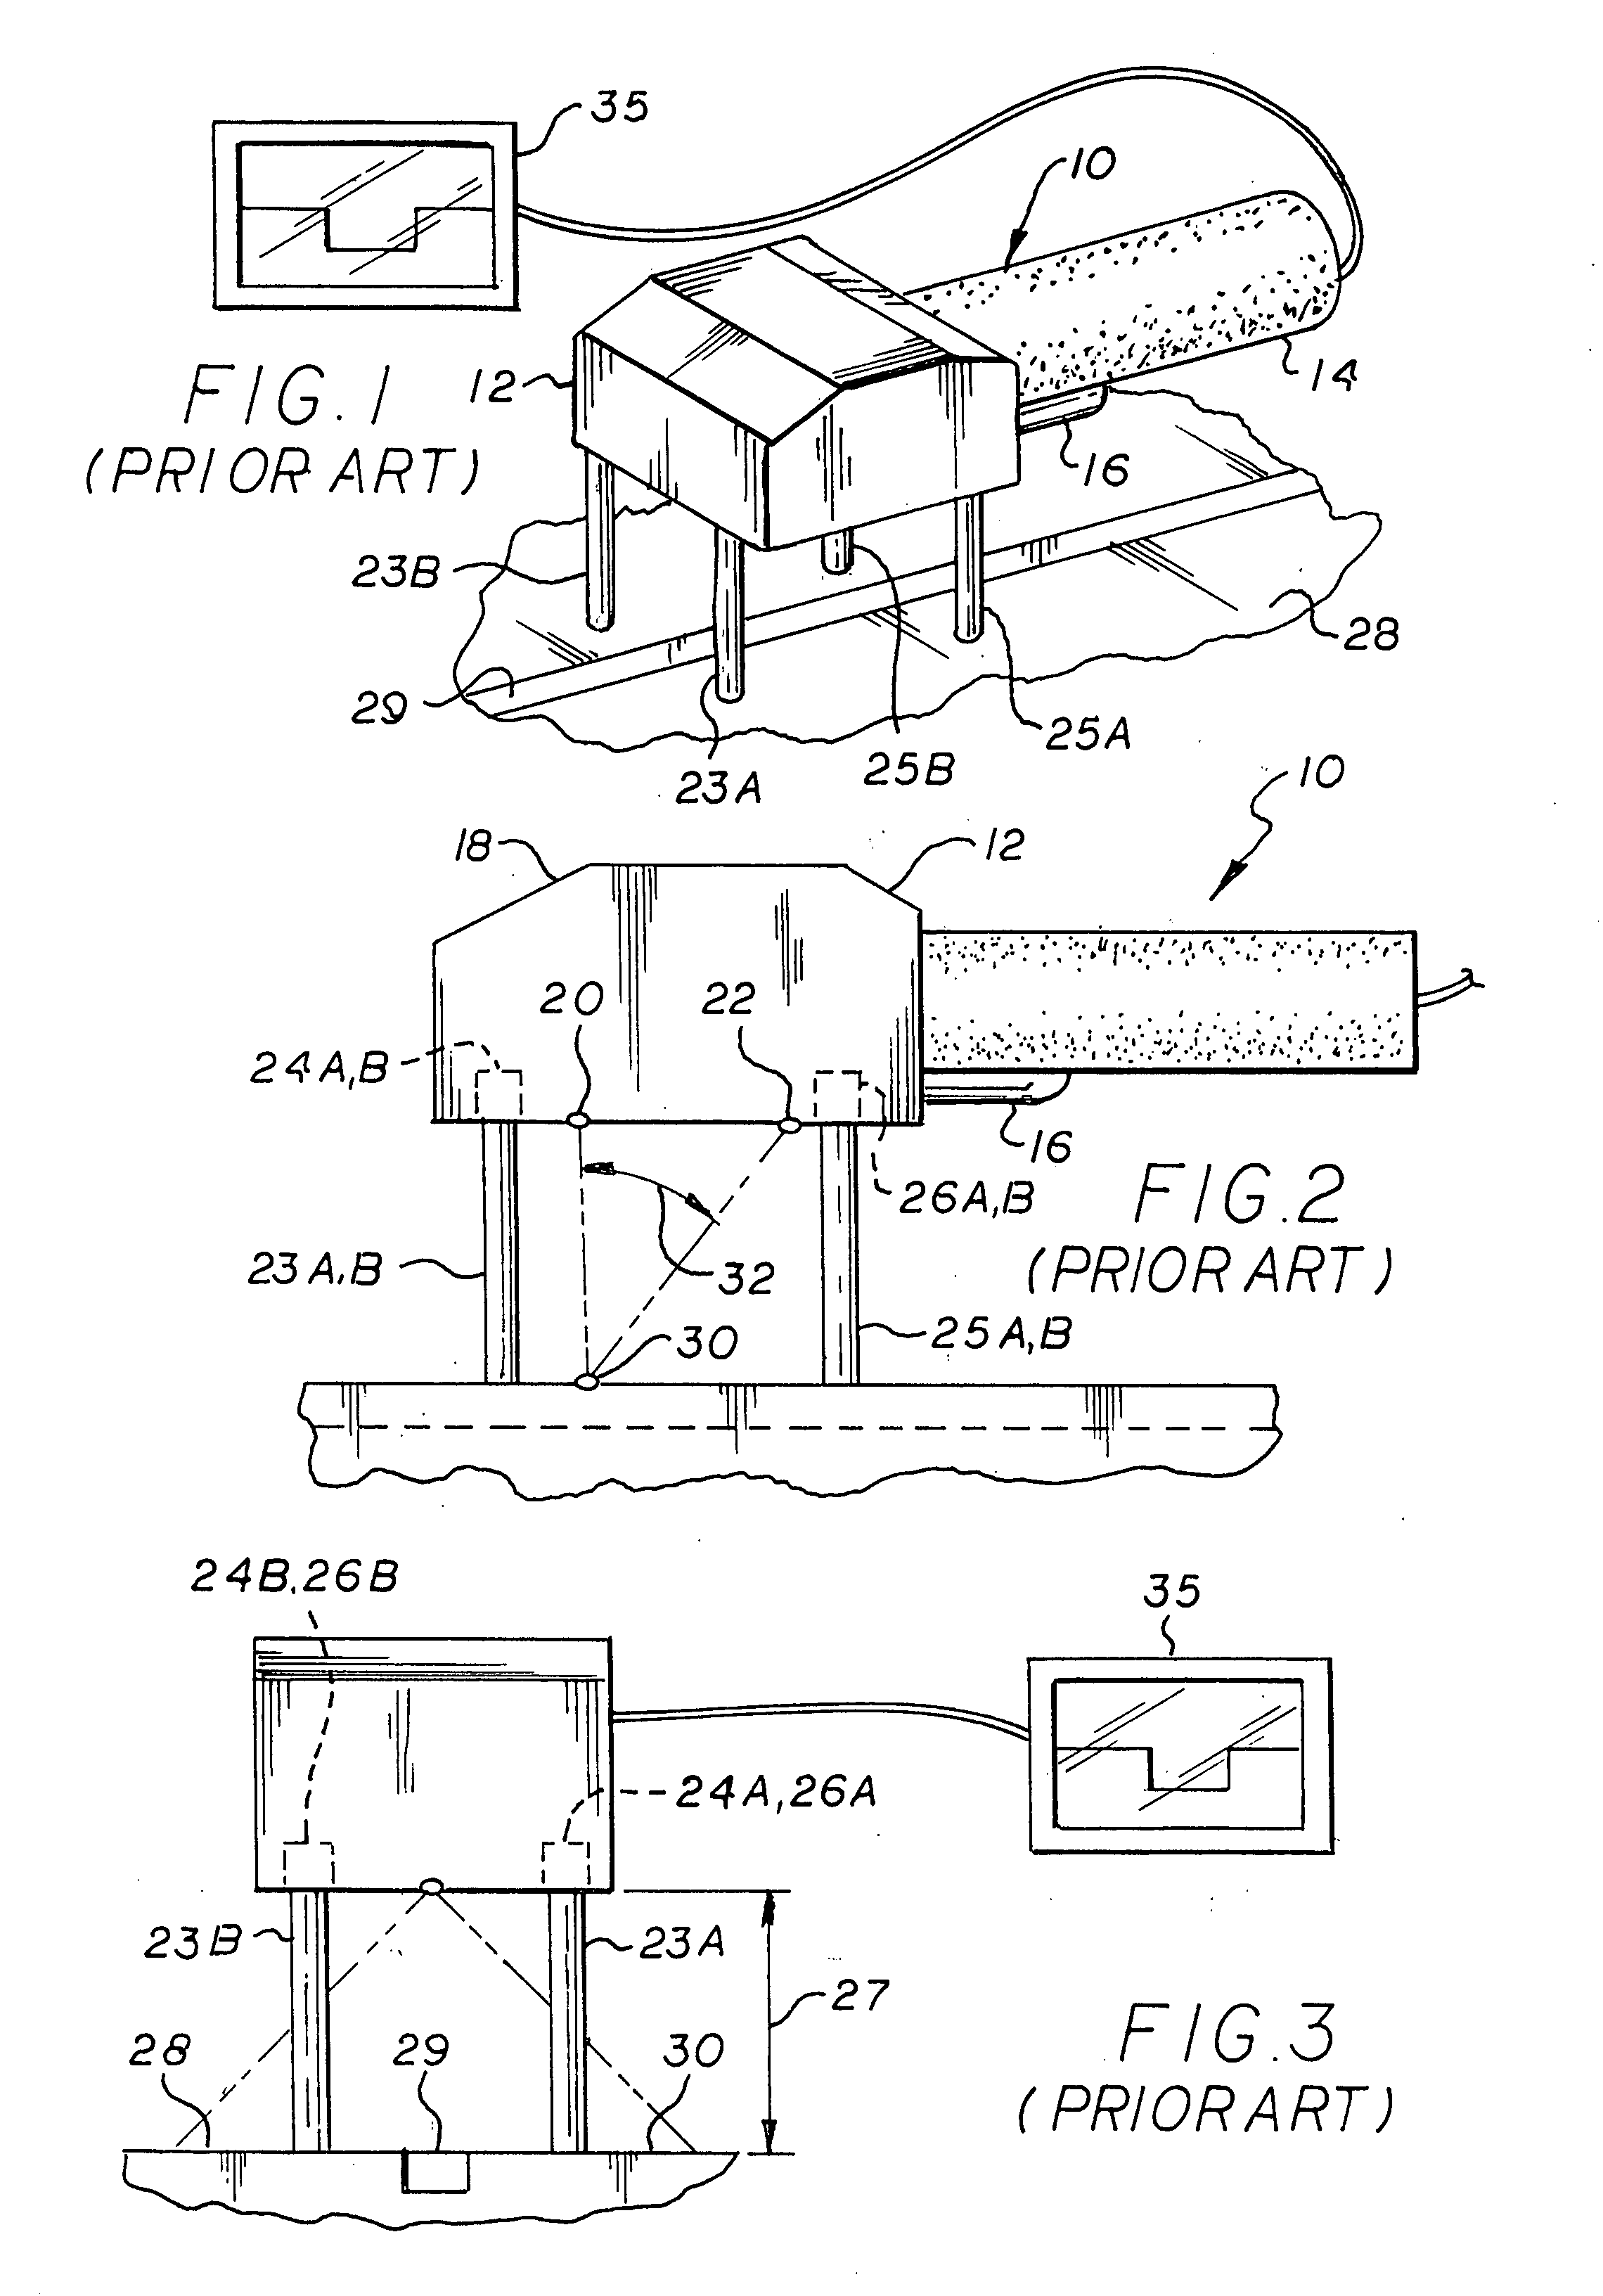 Device for inspecting countersunk holes